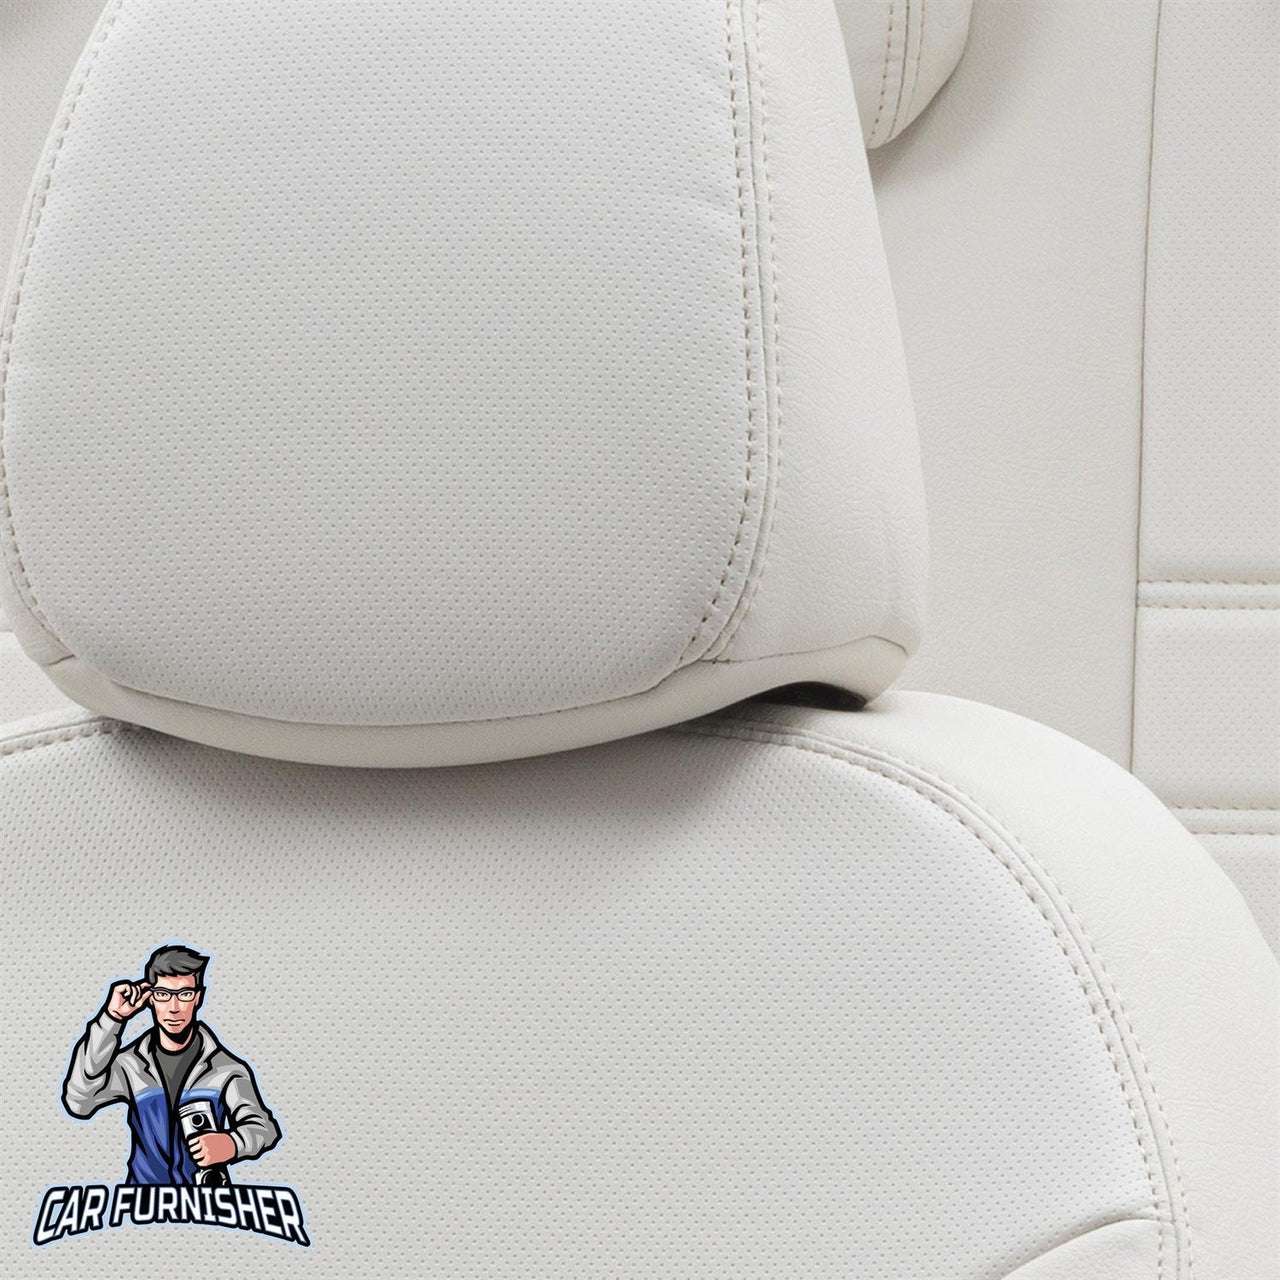 Peugeot 406 Seat Covers Istanbul Leather Design Ivory Leather